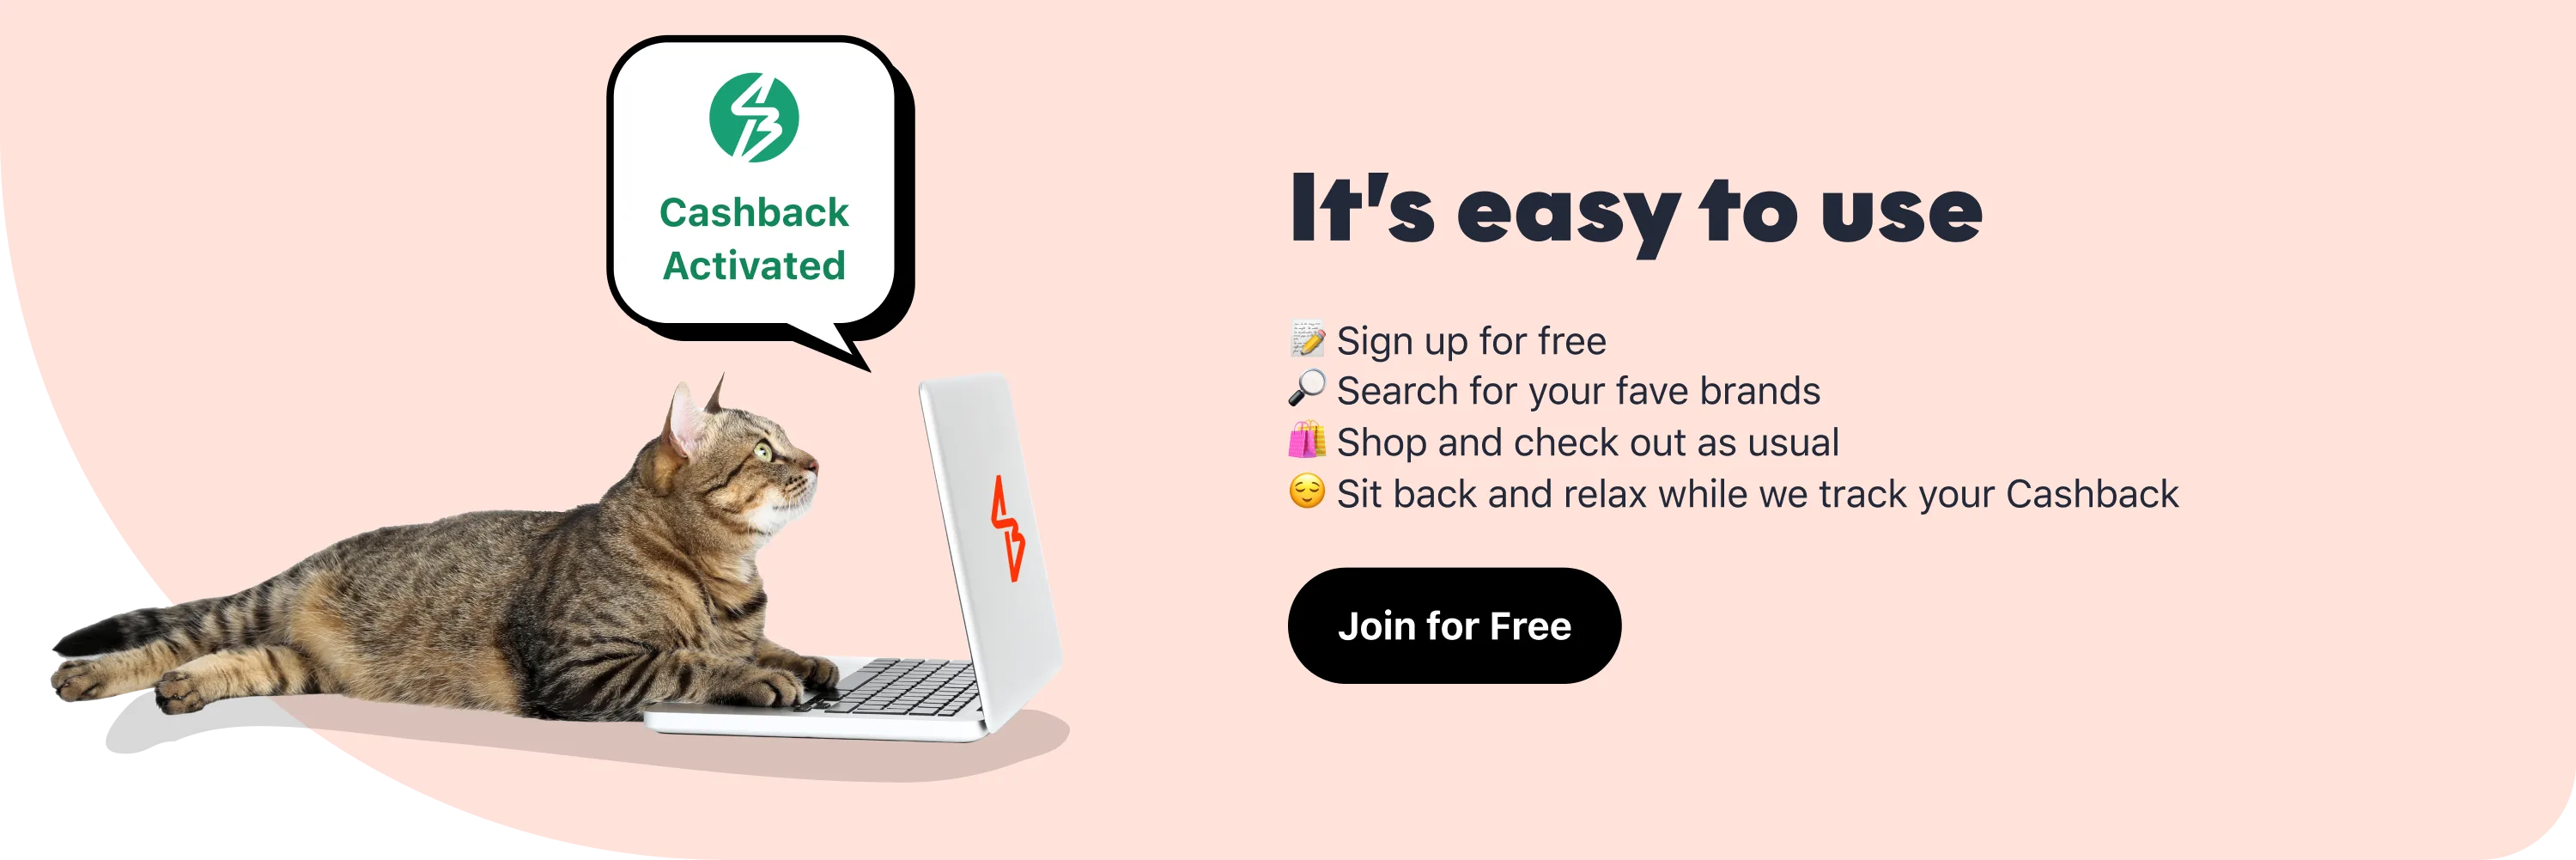 It's easy to use. Sign up, shop, earn cashback.